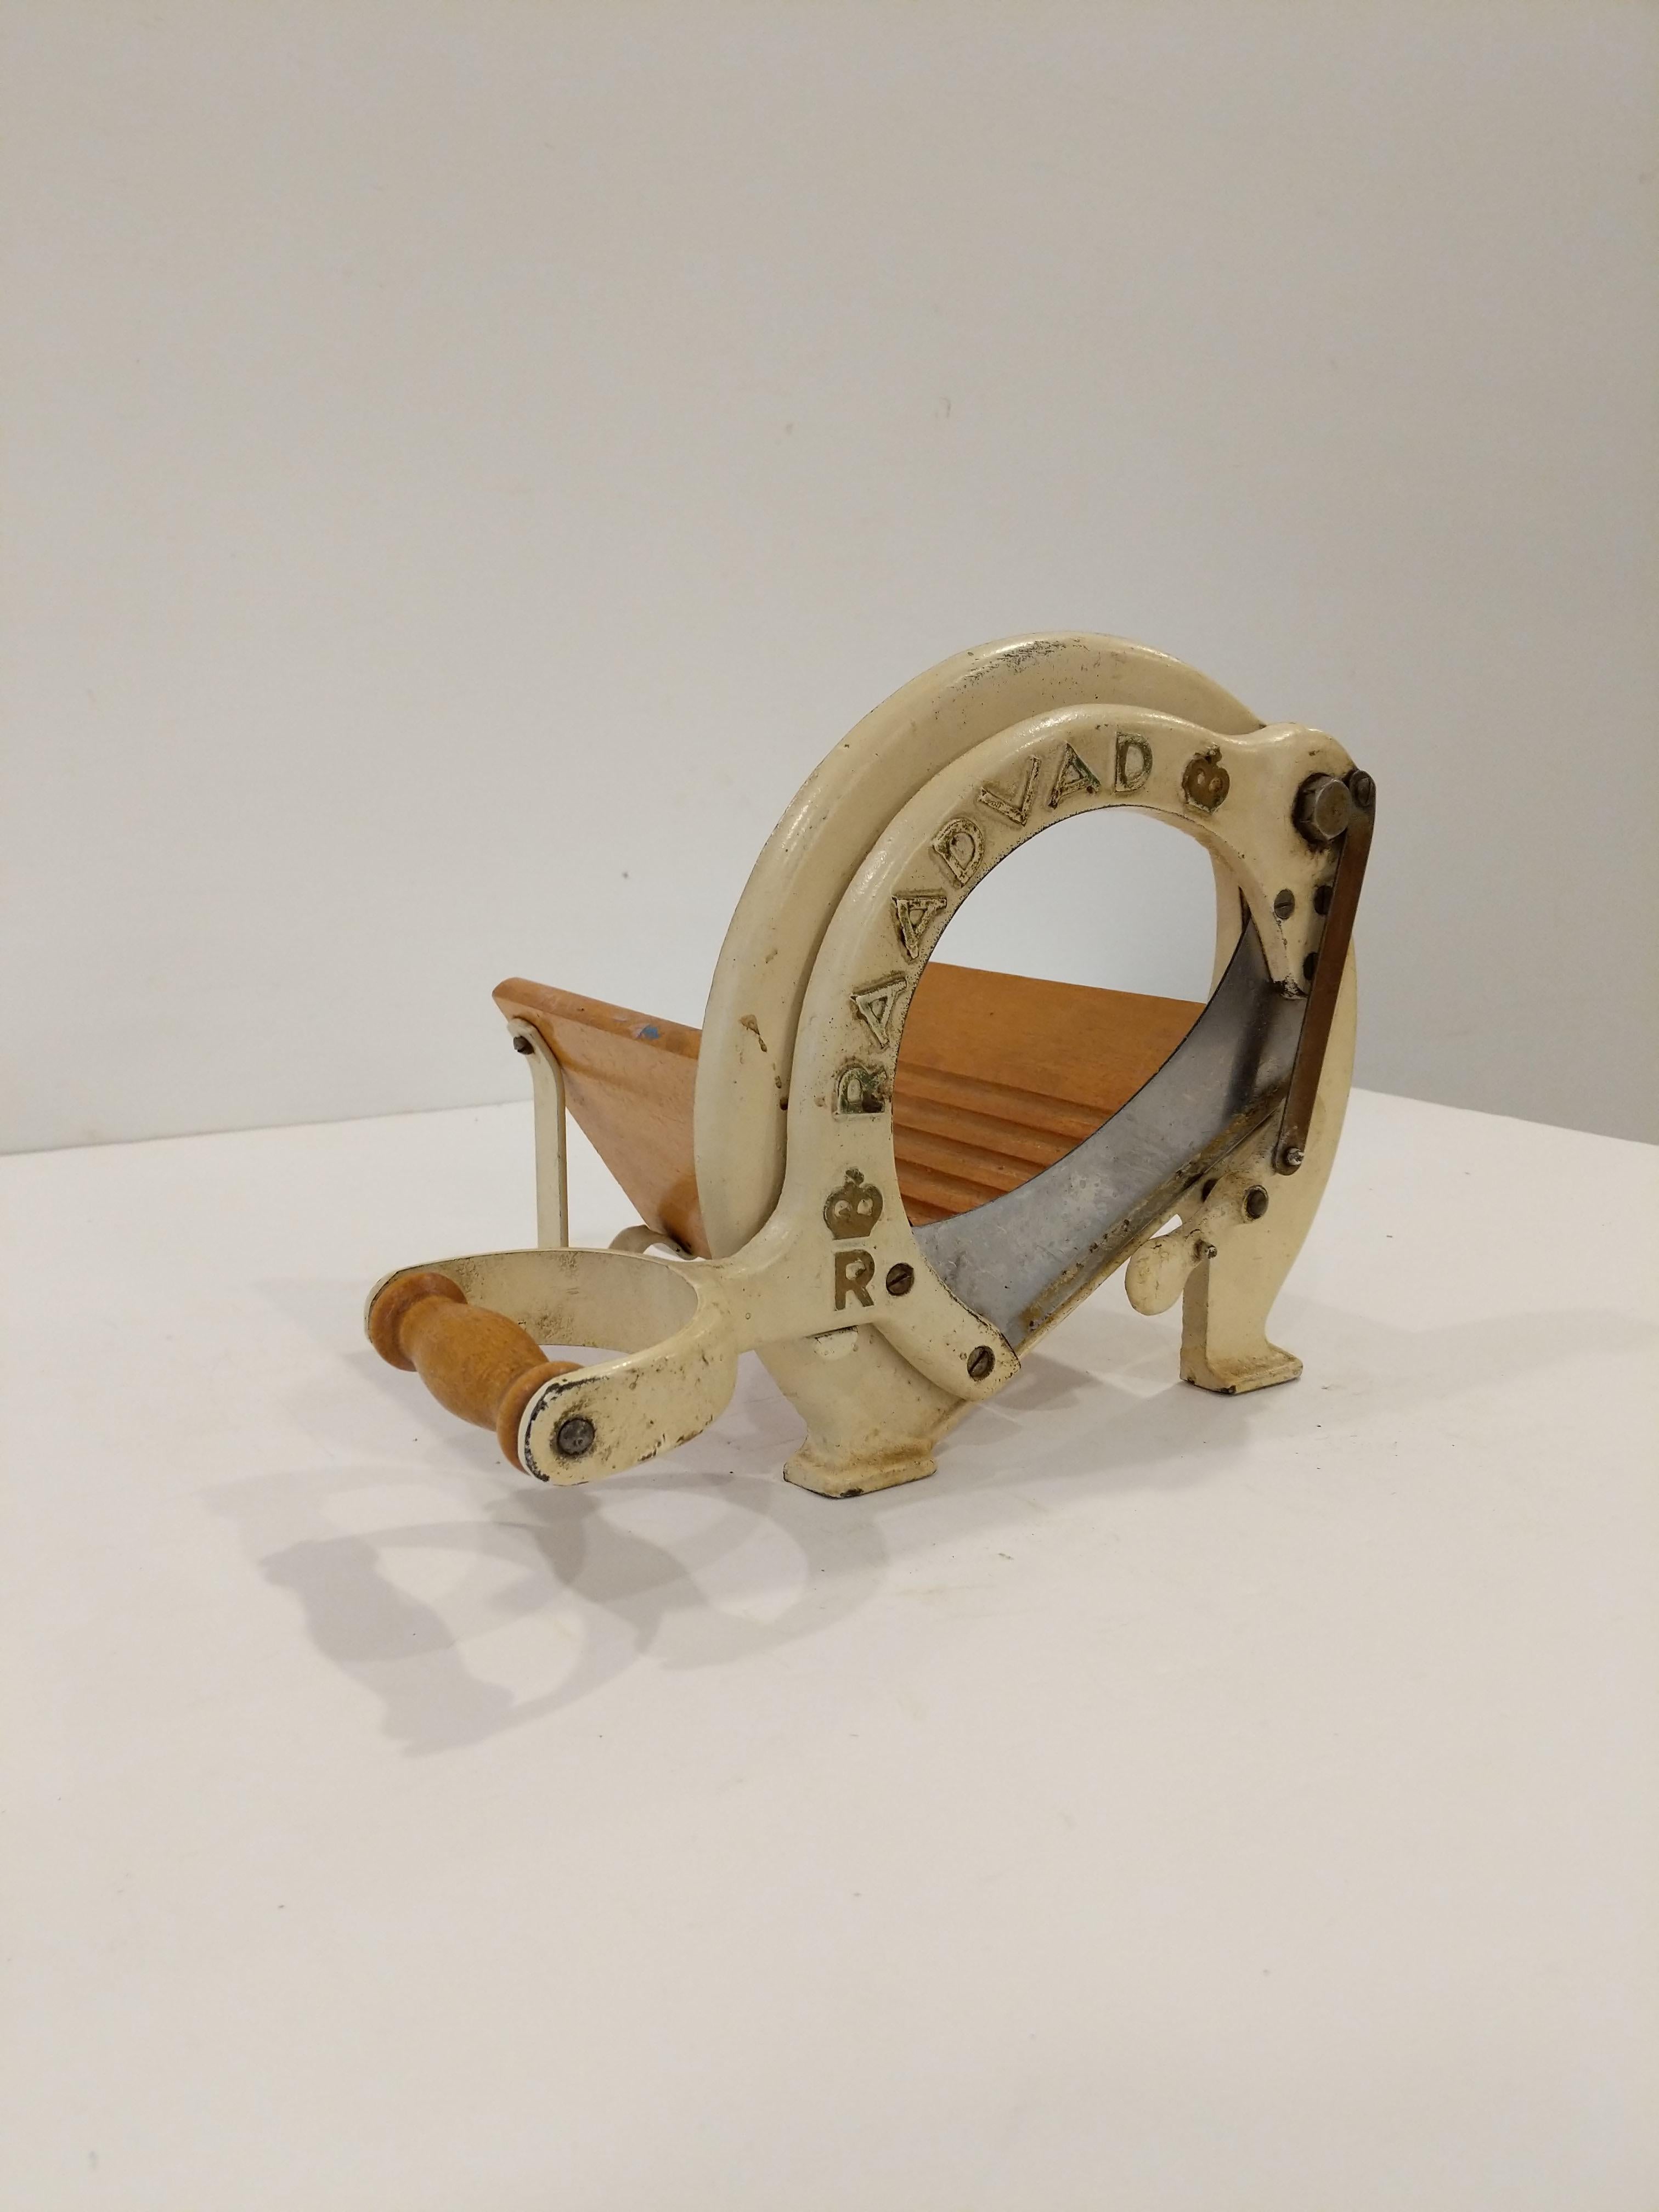 Authentic vintage Danish bread slicer / guillotine in cream with gold lettering.

Model 294 by Raadvad.

This slicer is in good condition overall and expectedly shows its age a bit.

Dimensions:
13.5” Long including handle
9.5” Tall
8” Wide

Ref: